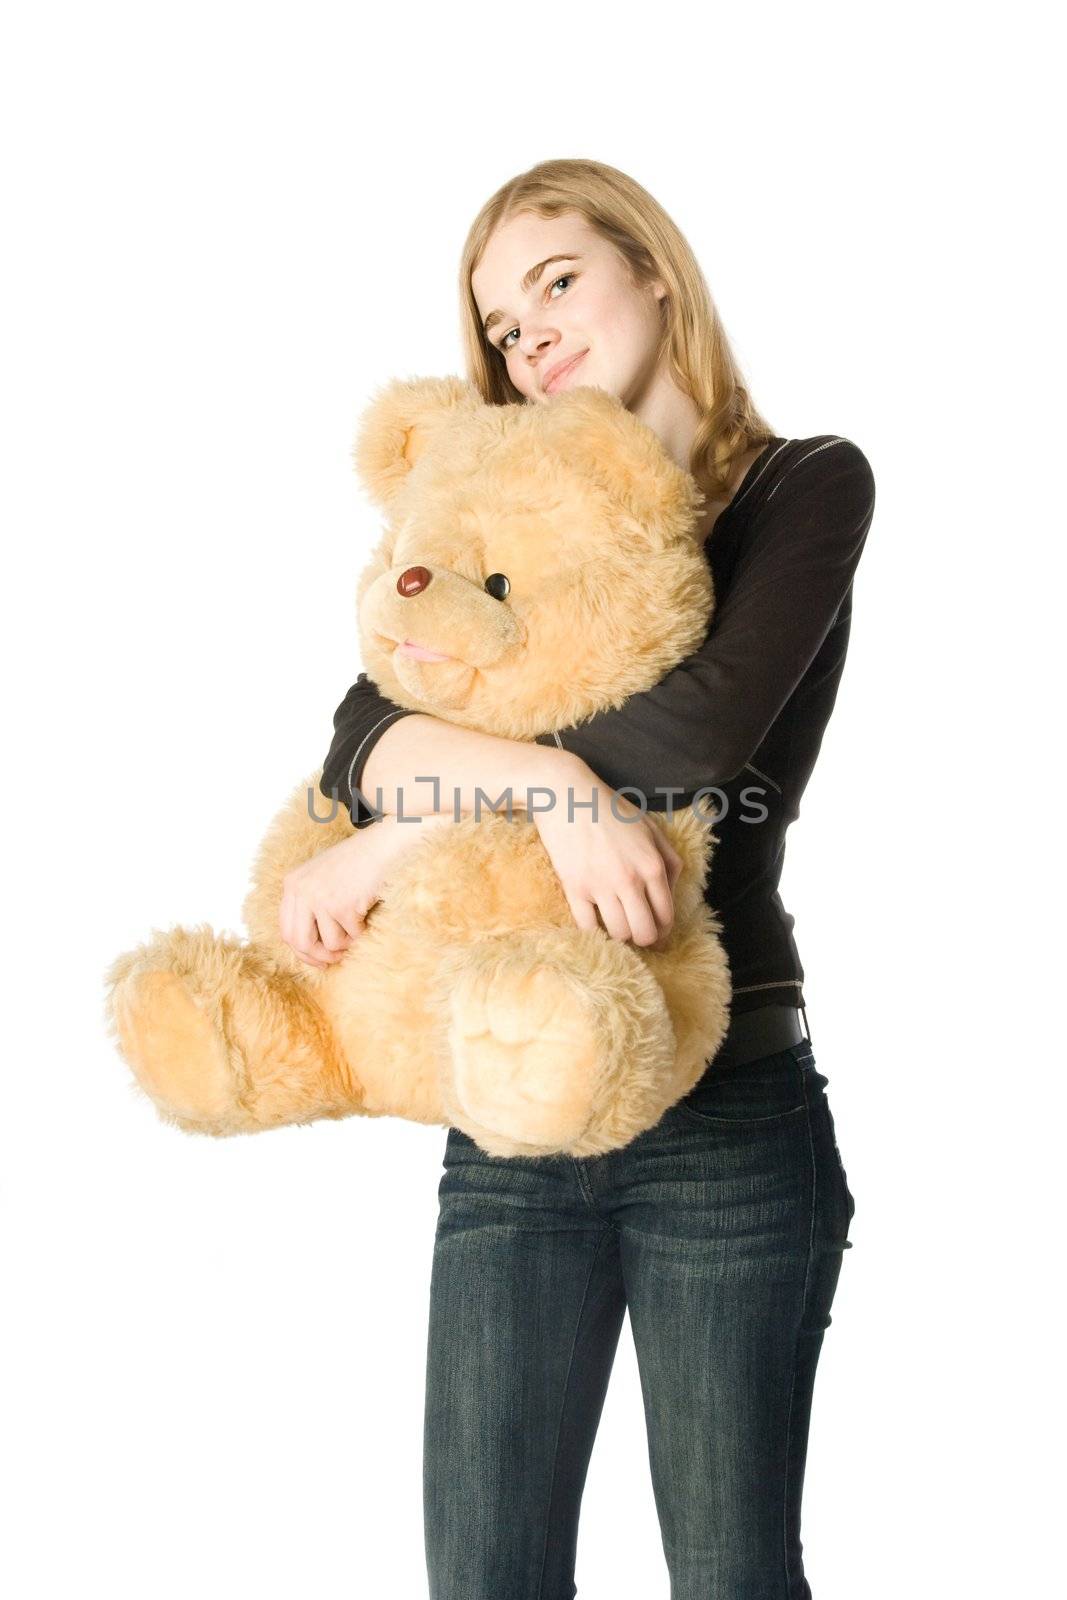 Young girl hugging a Teddy bear, isolated